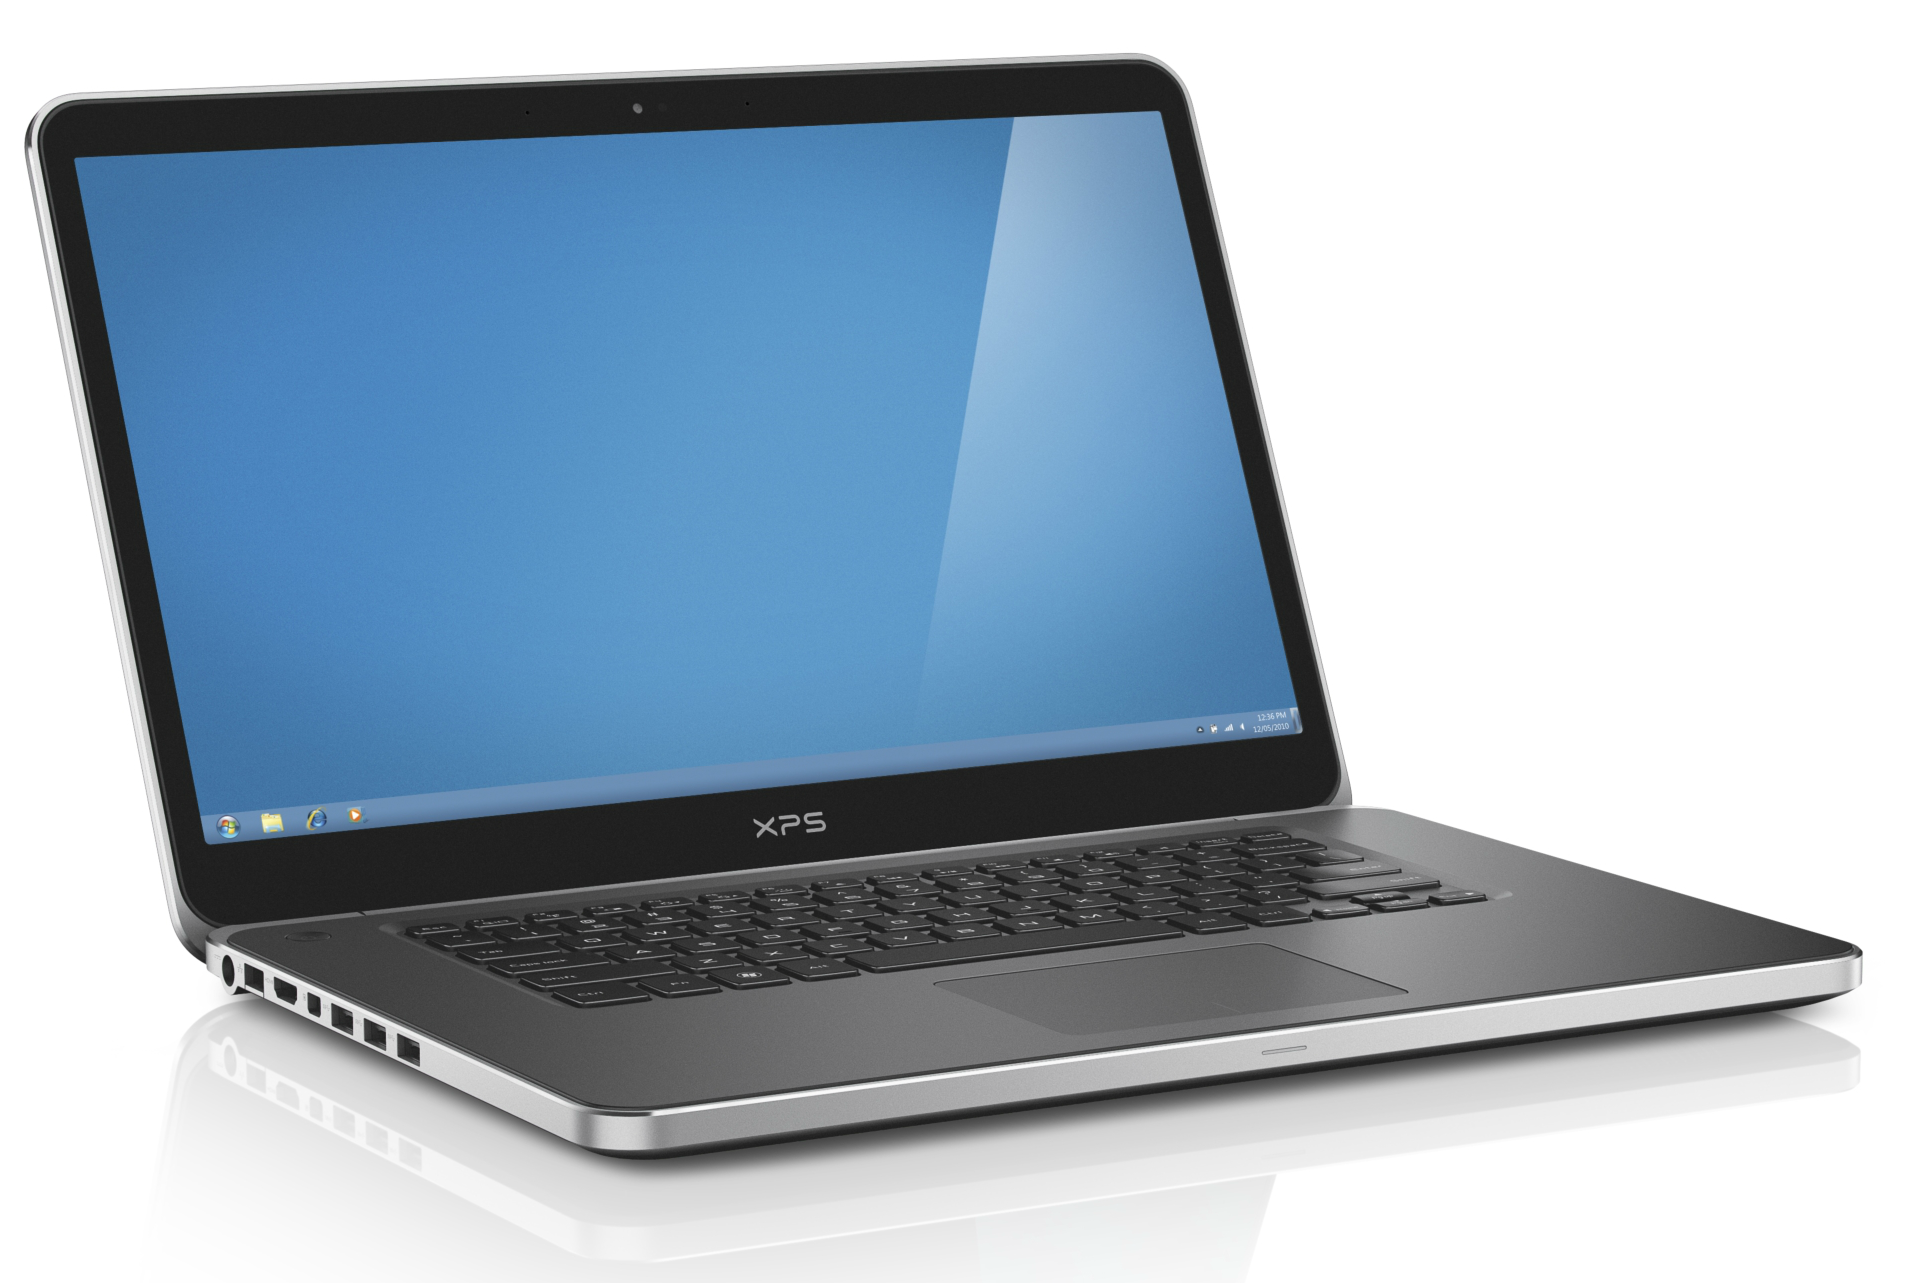  Dell declares the updated XPS 13 the world s smallest 13 